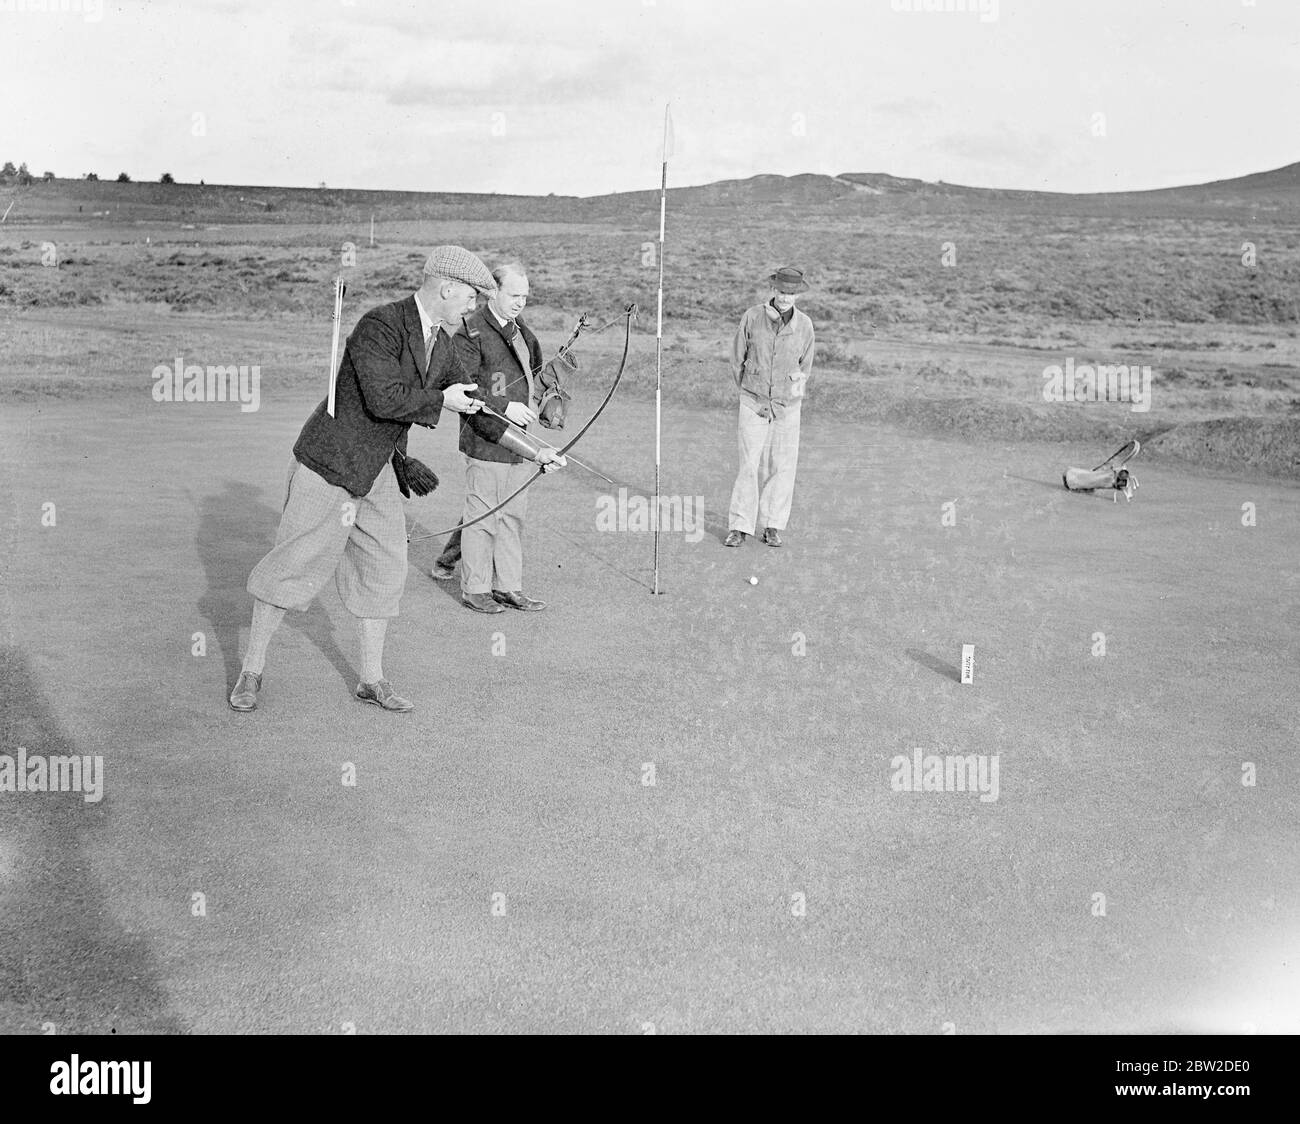 Playing with bow and arrow, Major J G Hayter, acknowledged expert at the annual sport of bow and arrow golf, met Colonel E St George Kirke, the captain of the club, in a match at the Hankley Common Golf Club, Surrey. He conceded a stroke a gale. Major Hayter shoots his arrow into a box instead of a hole. His average for most of the Surrey courses is in the seventies. Photo shows: Major J G Hayter shooting into the box, watched by his opponent, Col E St George Kirke. 18 October 1938 Stock Photo